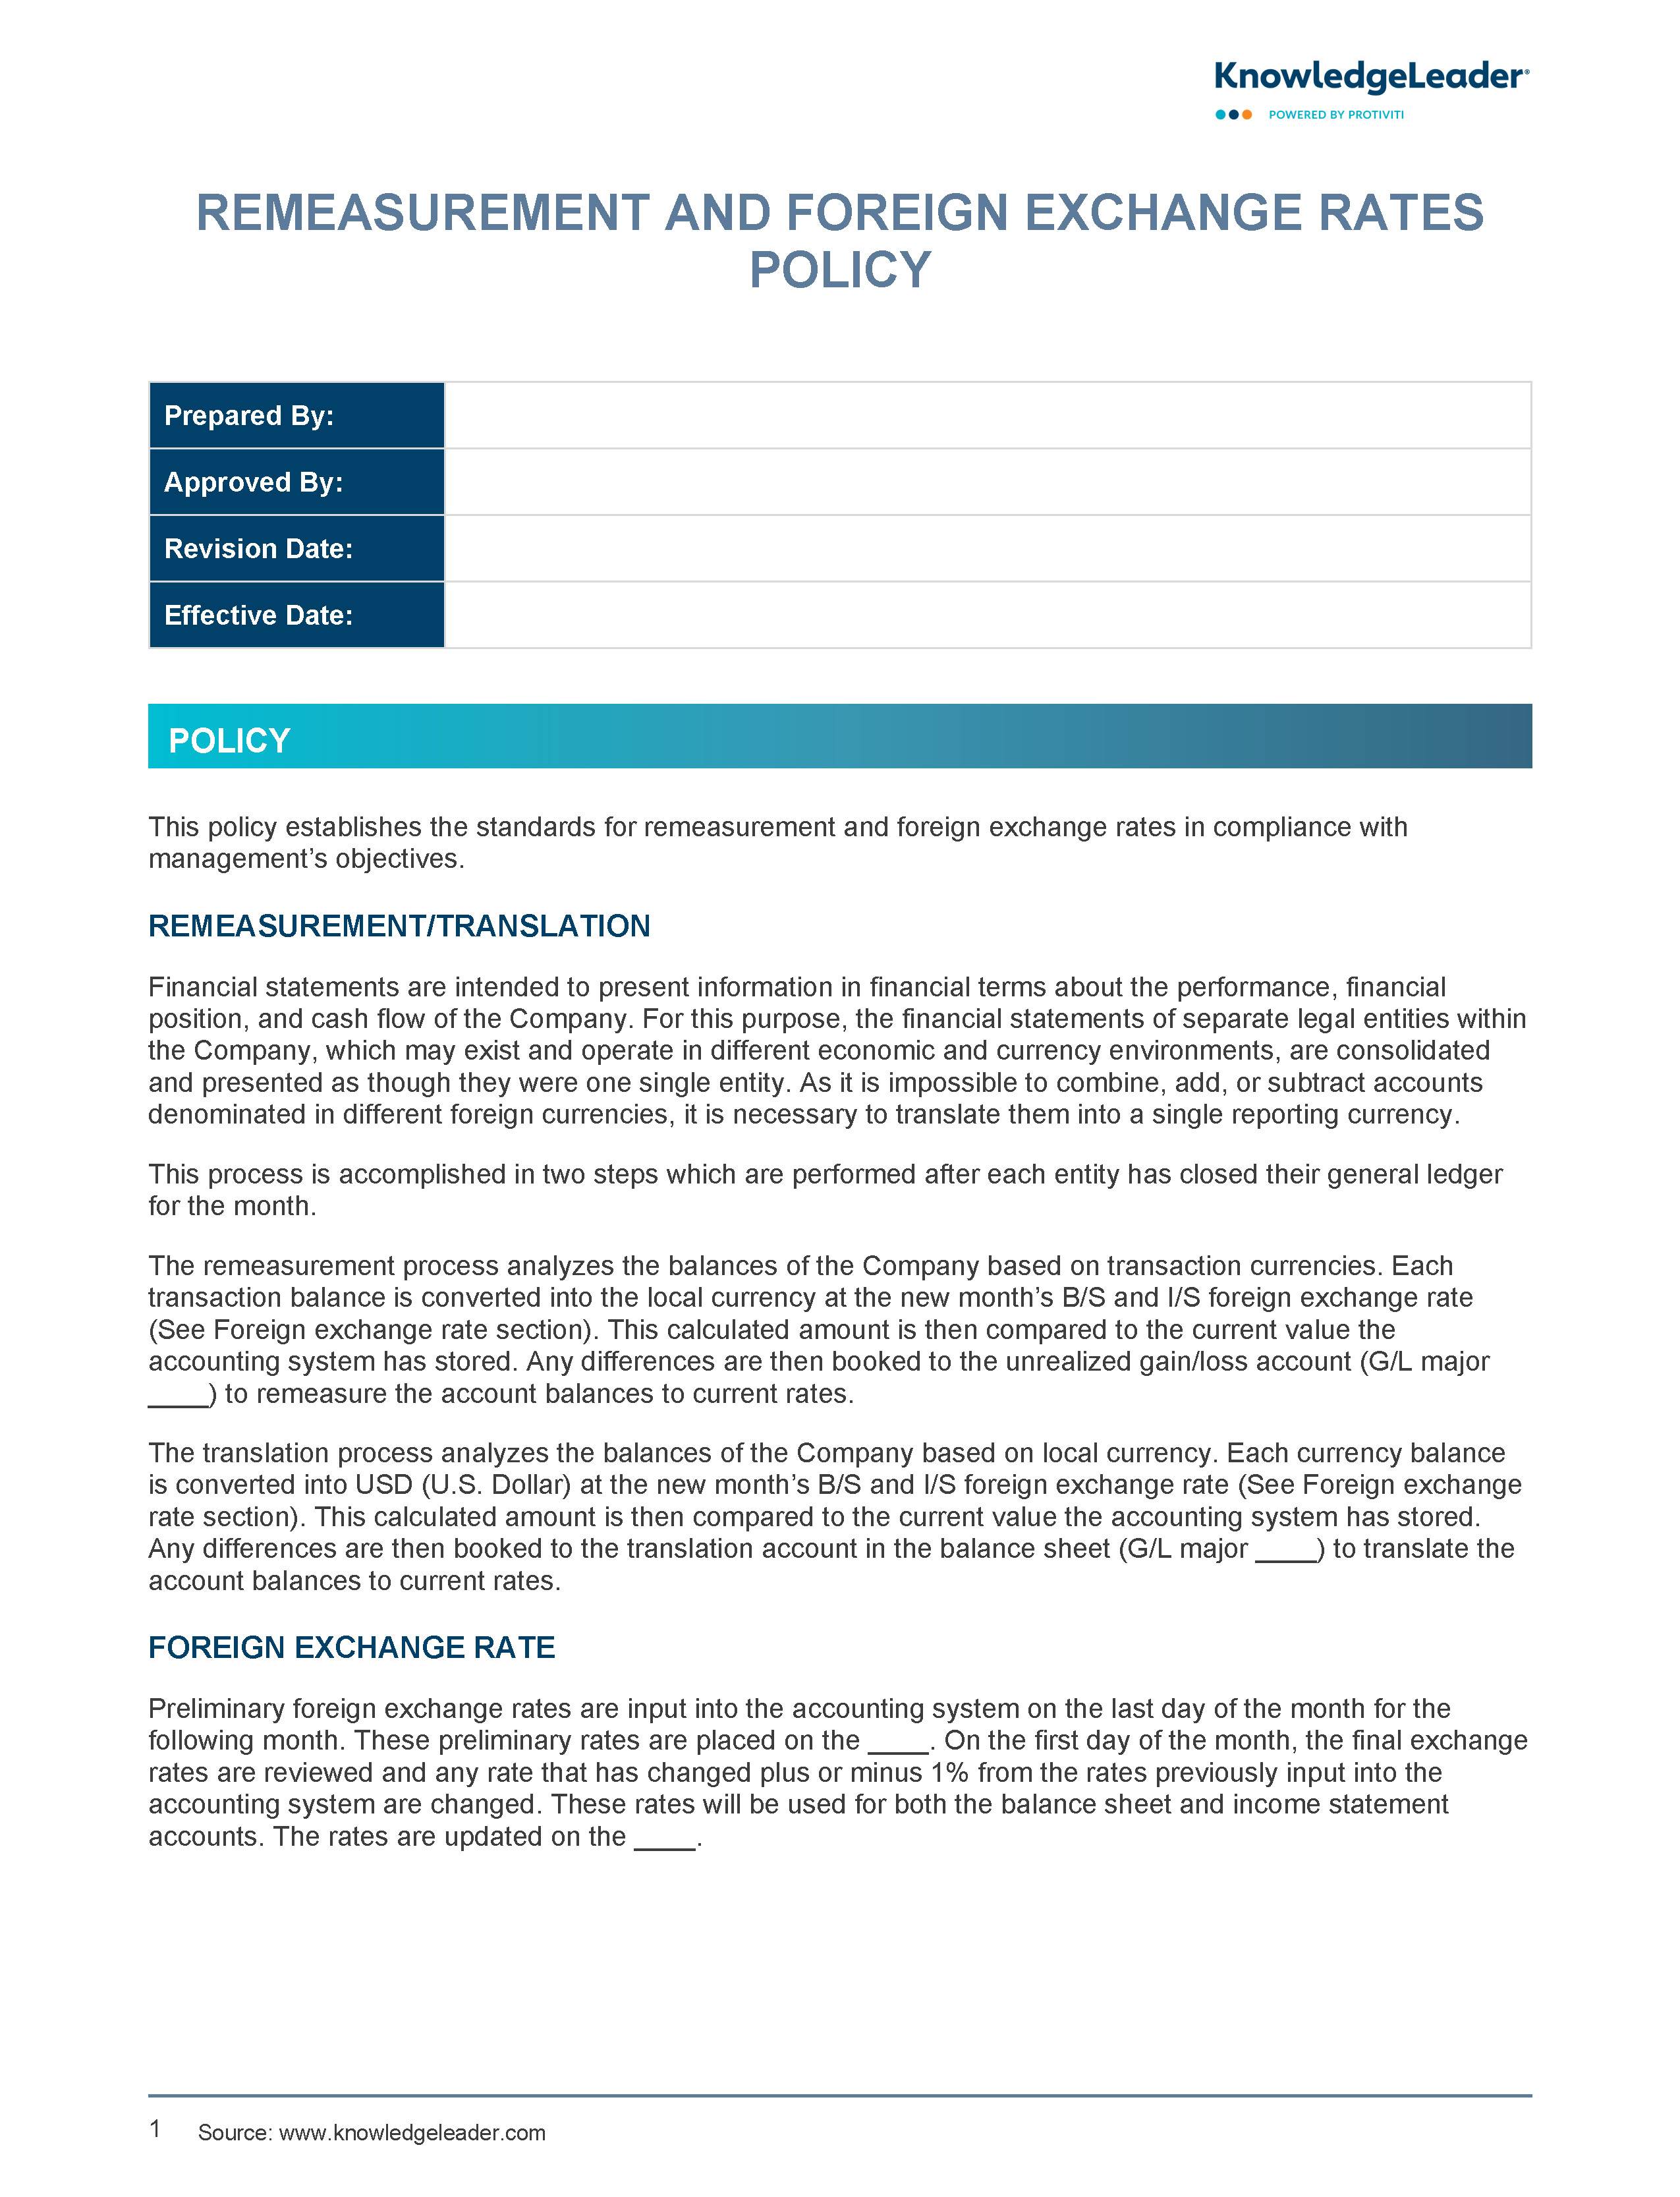 Screenshot of the first page of Remeasurement and Foreign Exchange Rates Policy